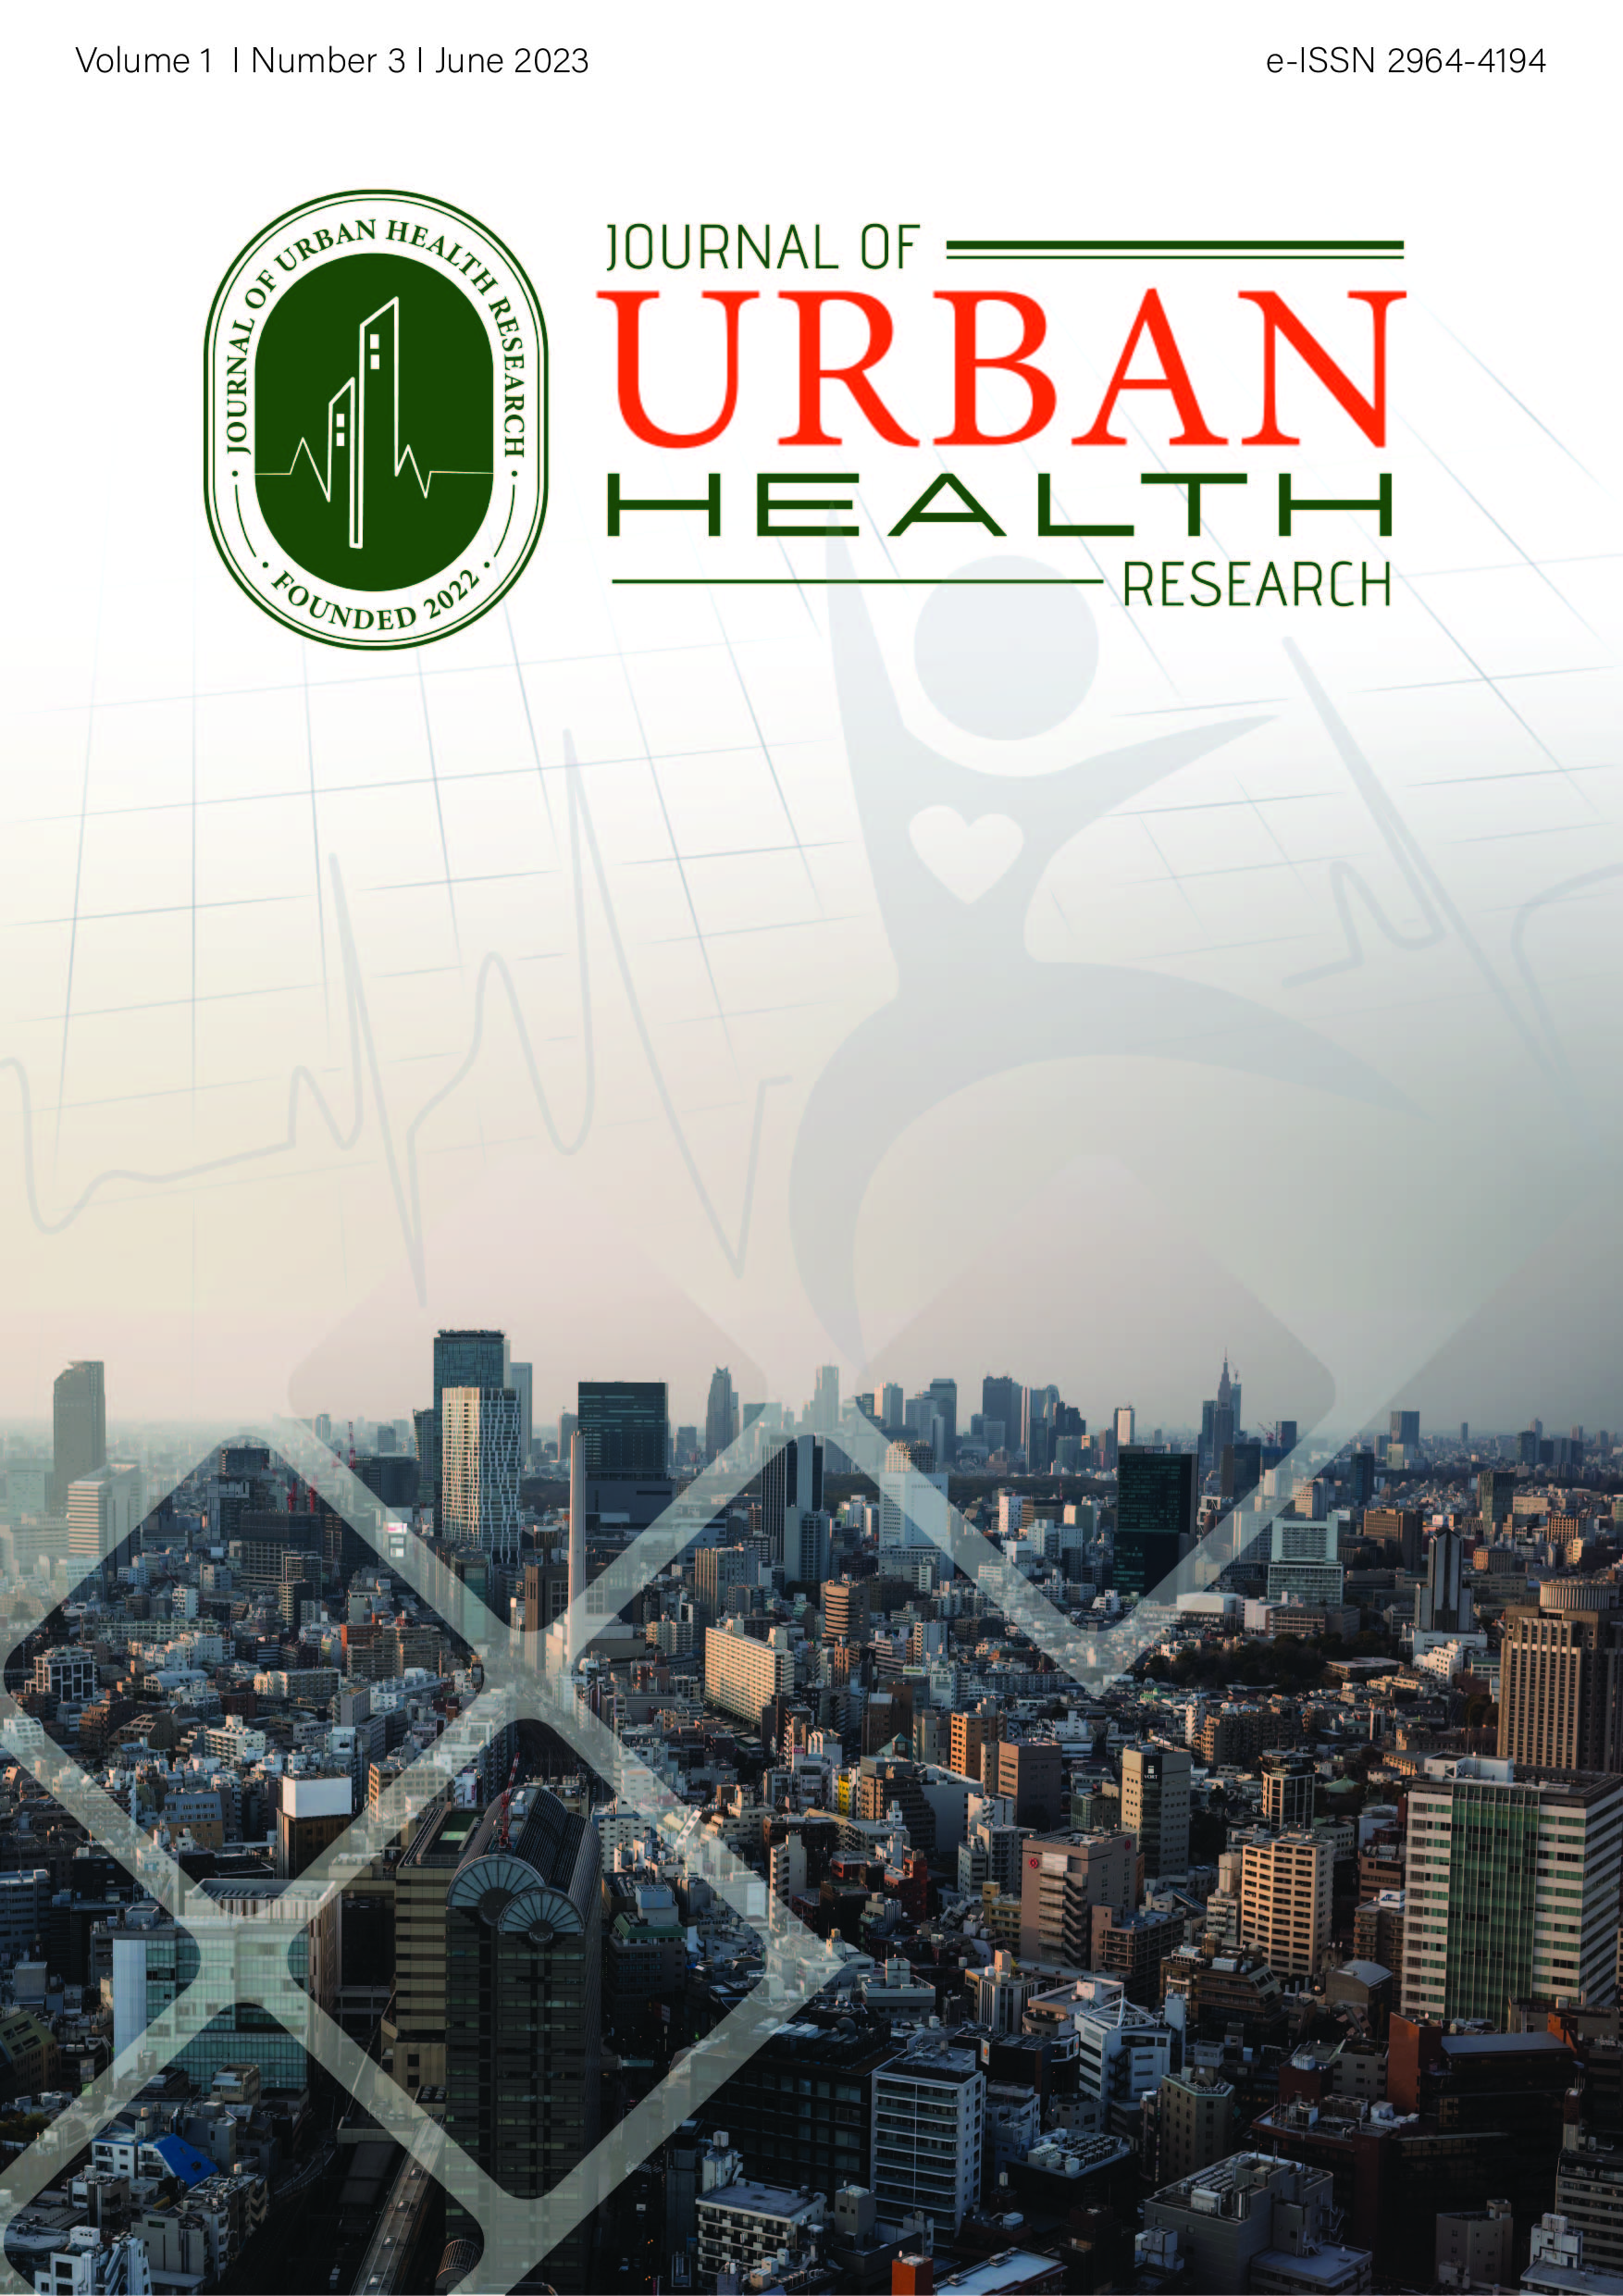 					View Vol. 1 No. 3 (2023): Journal of Urban Health Research
				